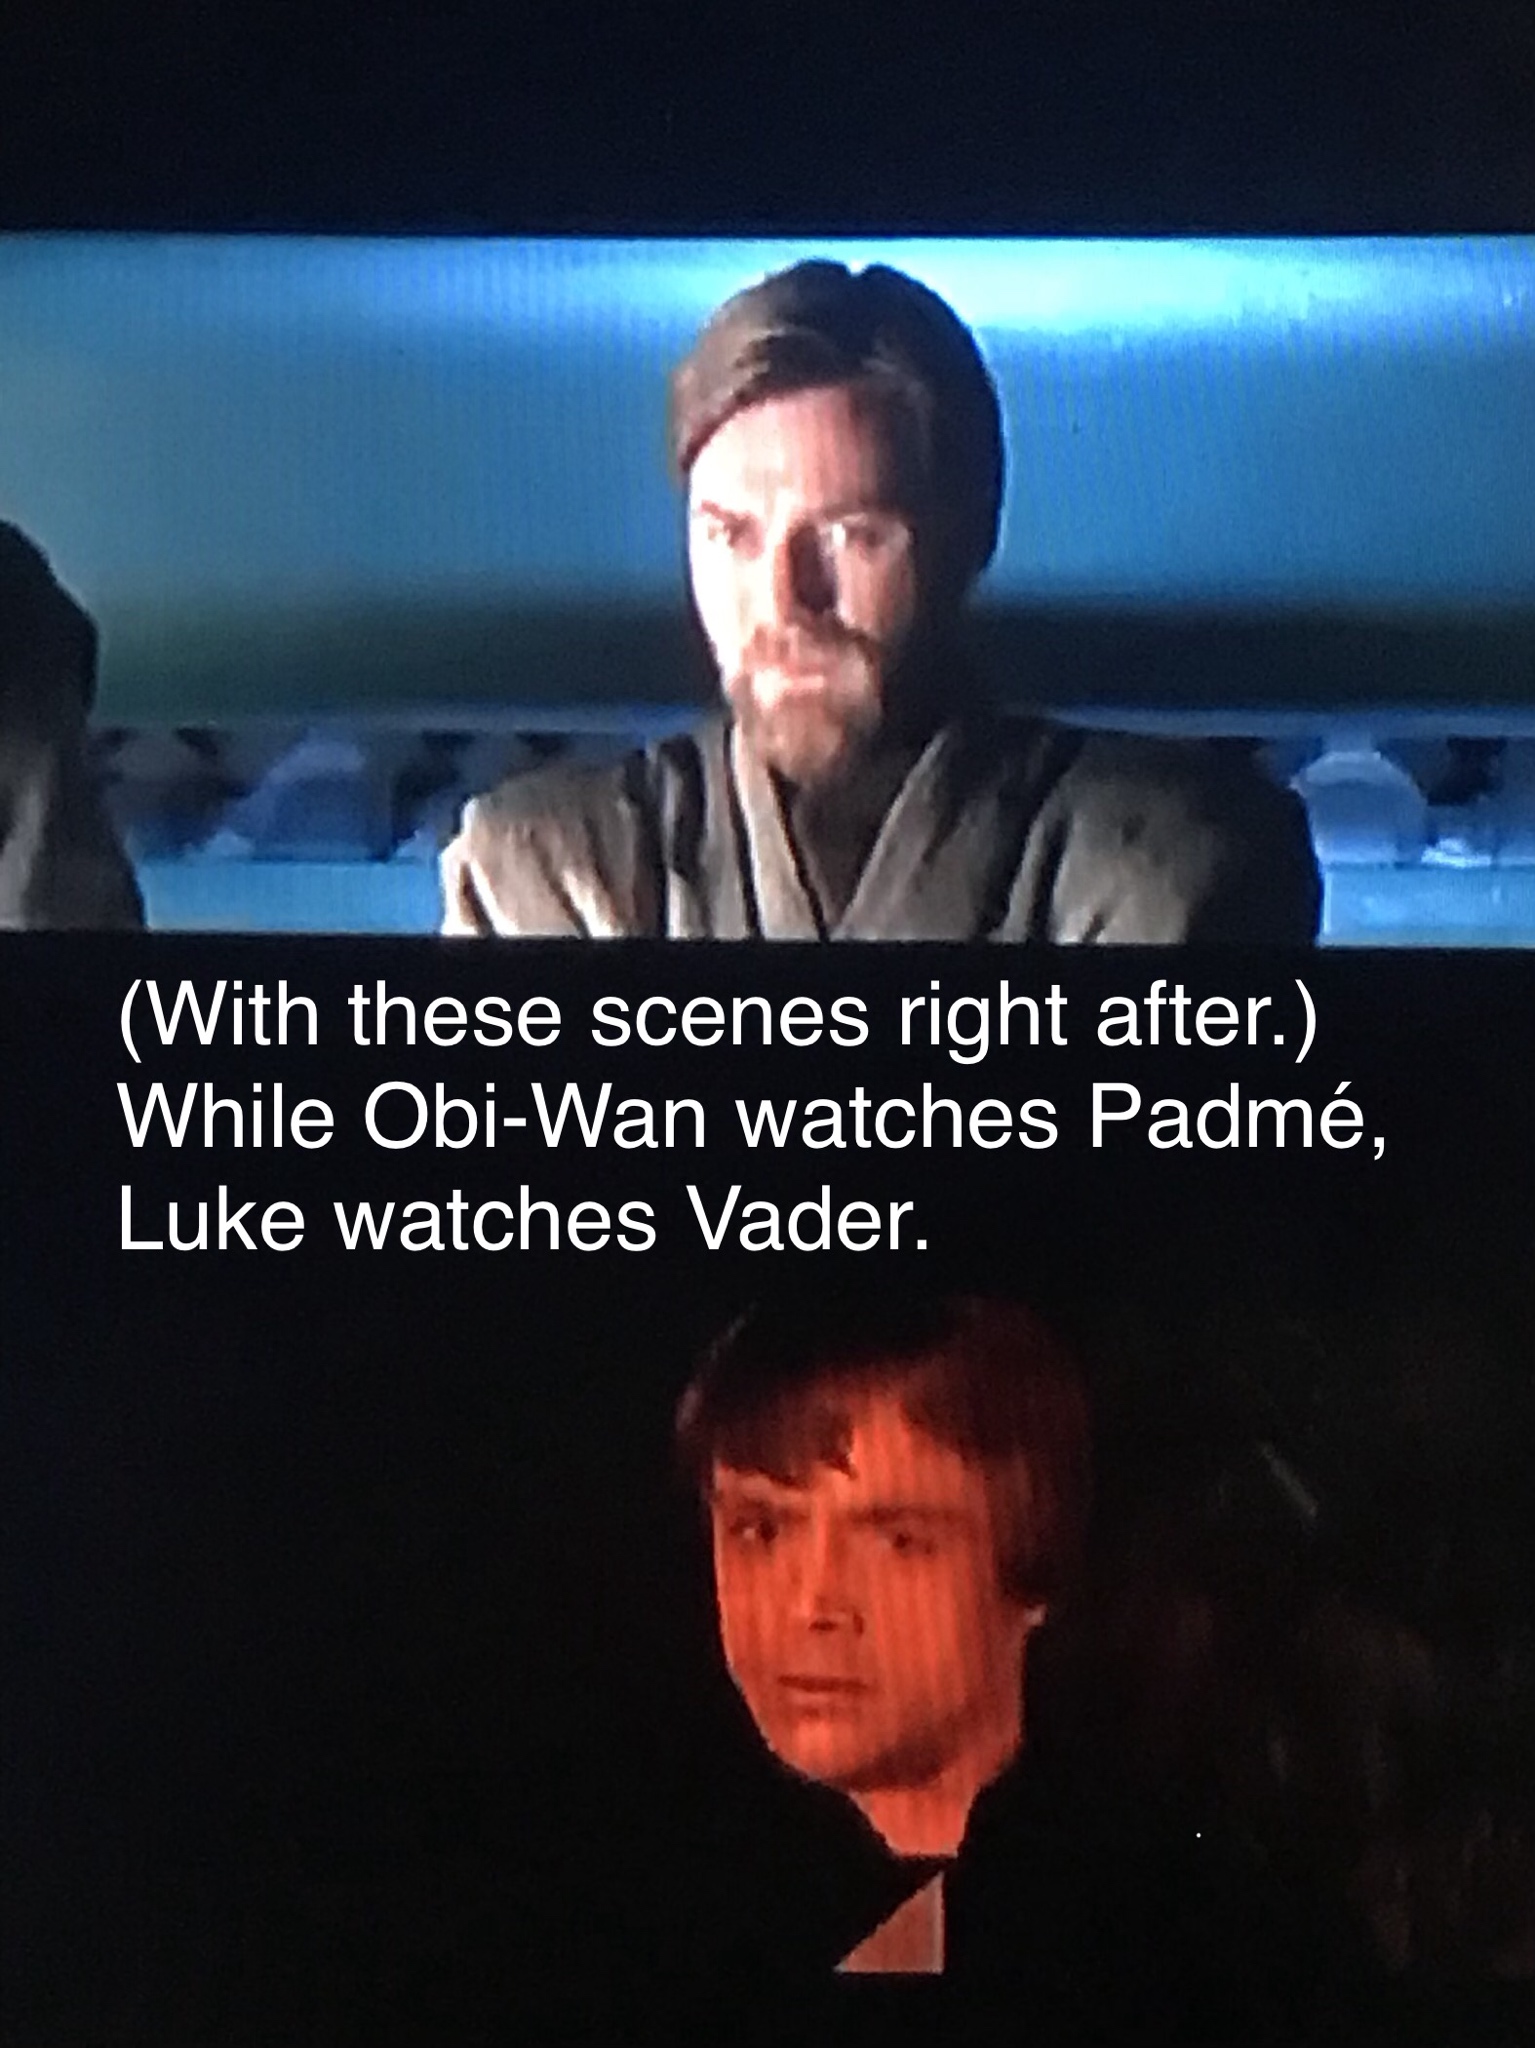 photo caption - With these scenes right after. While ObiWan watches Padm, Luke watches Vader.